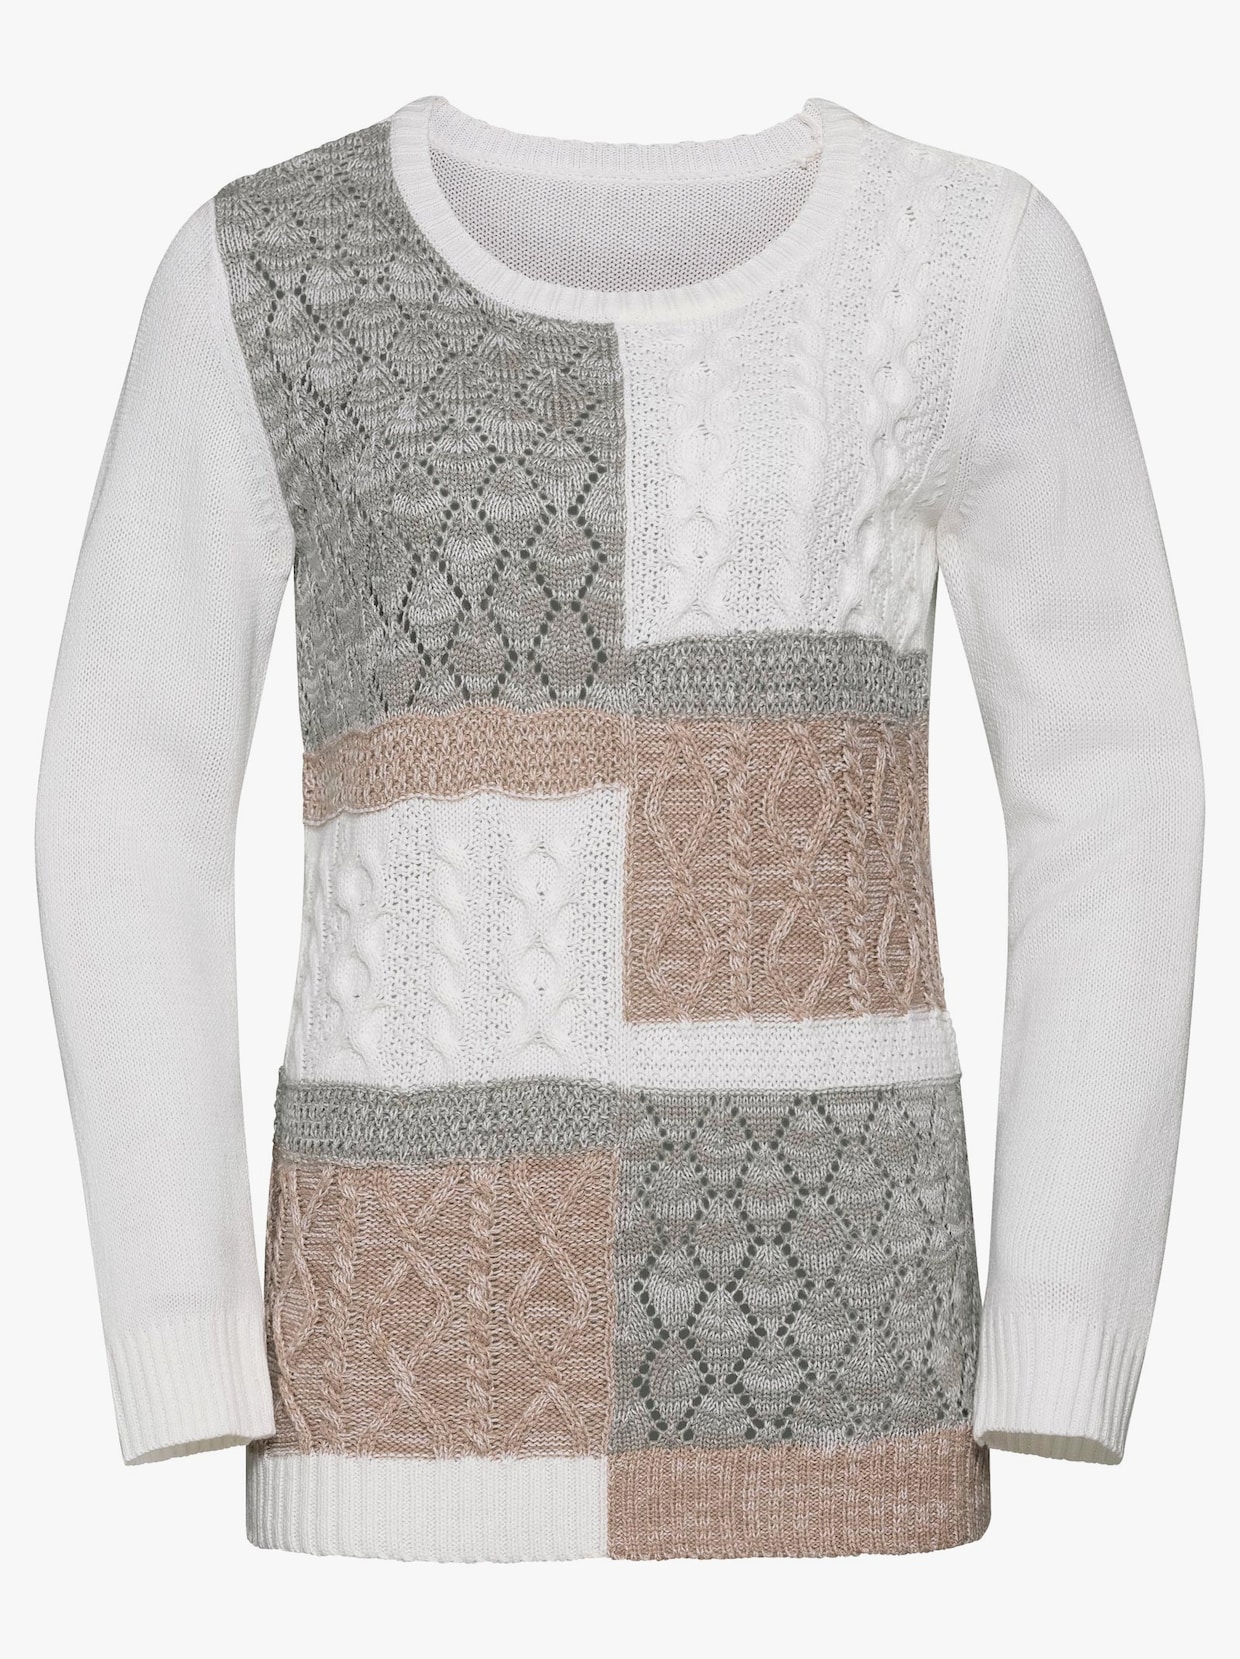 Tricotvest - wit/taupe